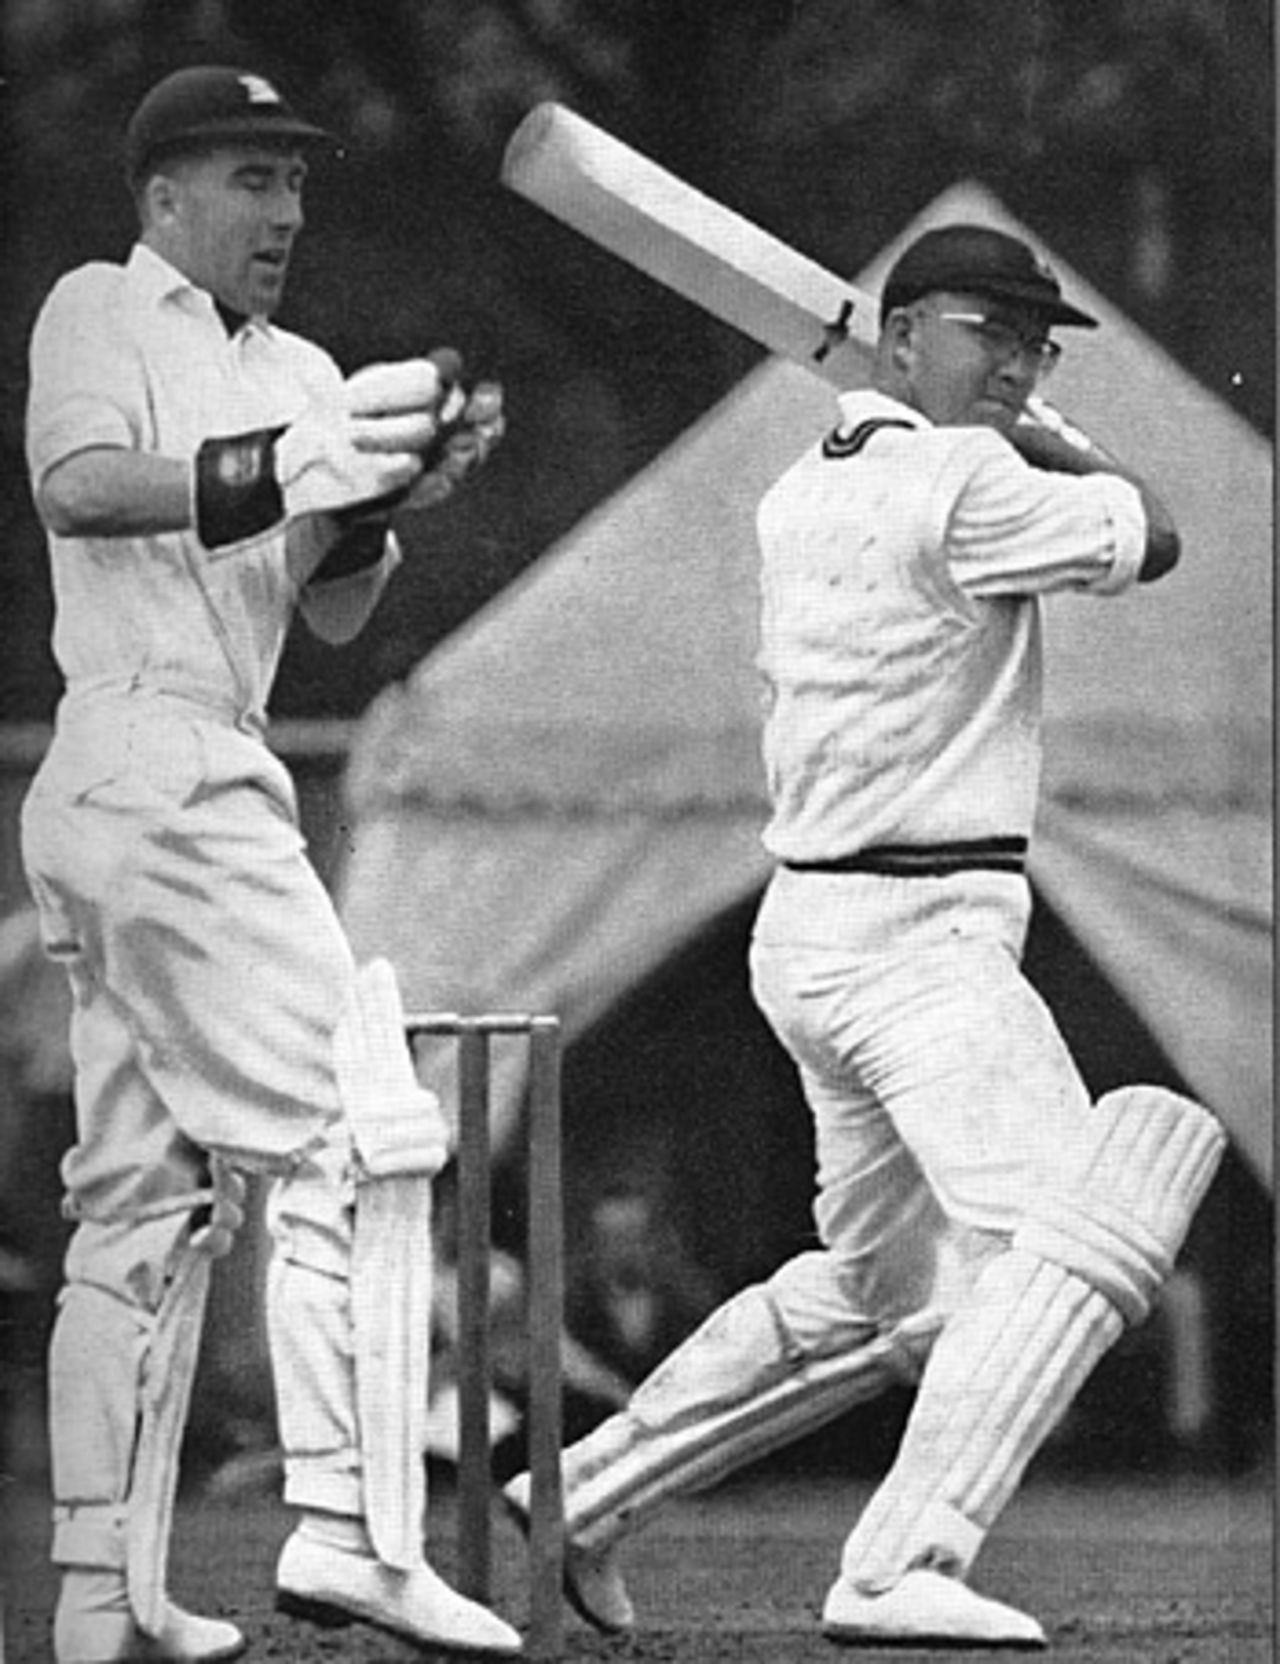 Eddie Barlow batting for the 1965 South Africans against Essex